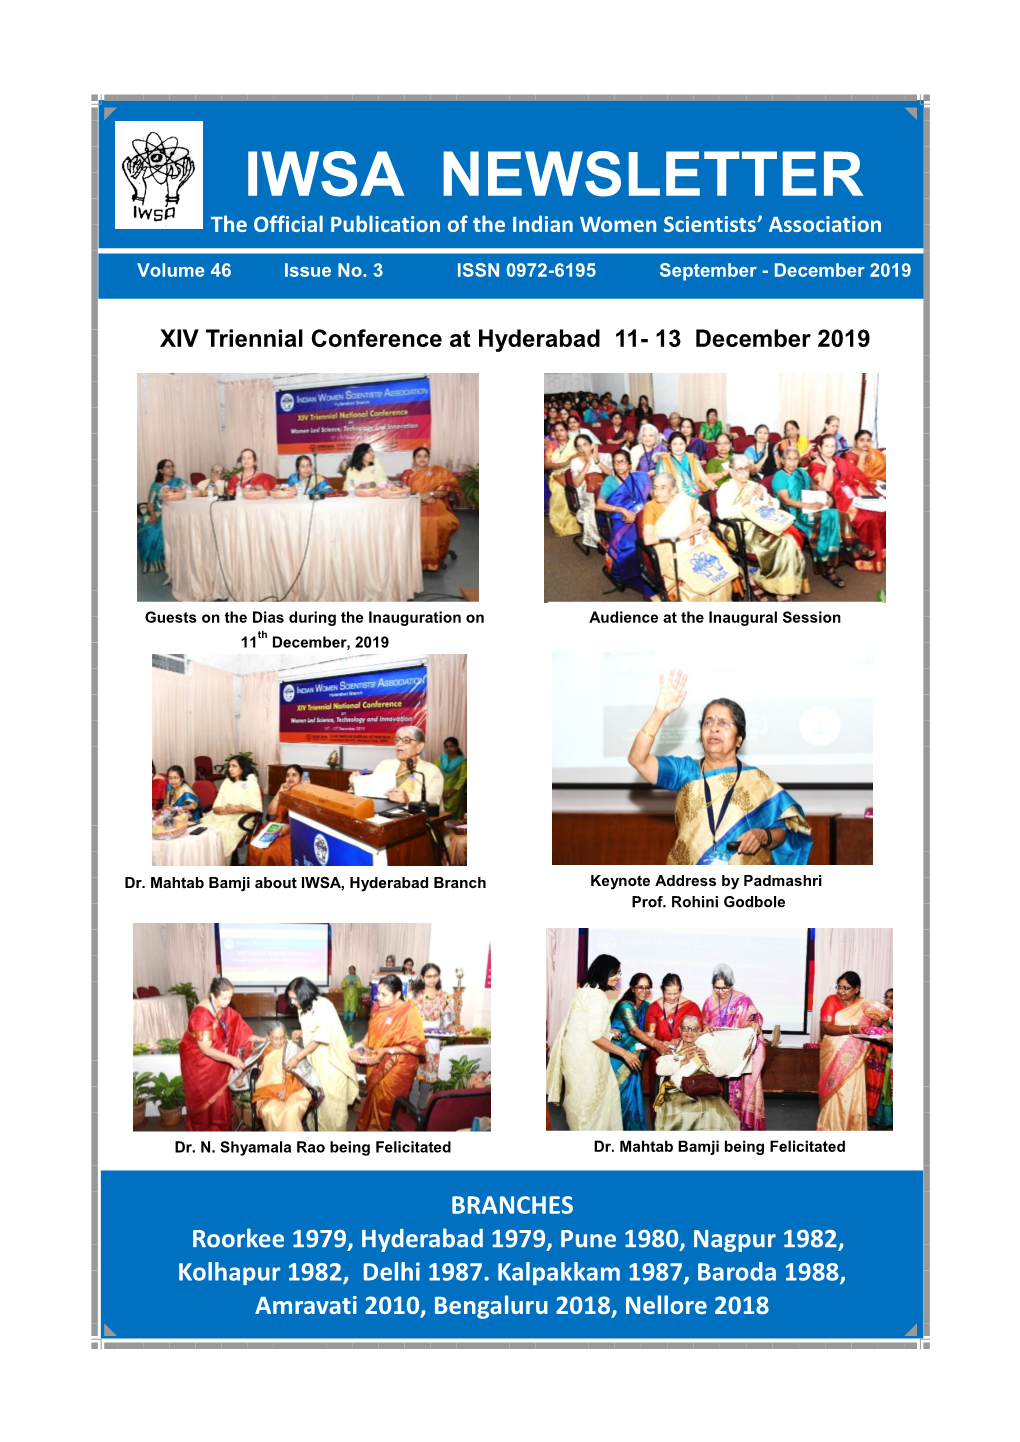 IWSA NEWSLETTER the Official Publication of the Indian Women Scientists’ Association